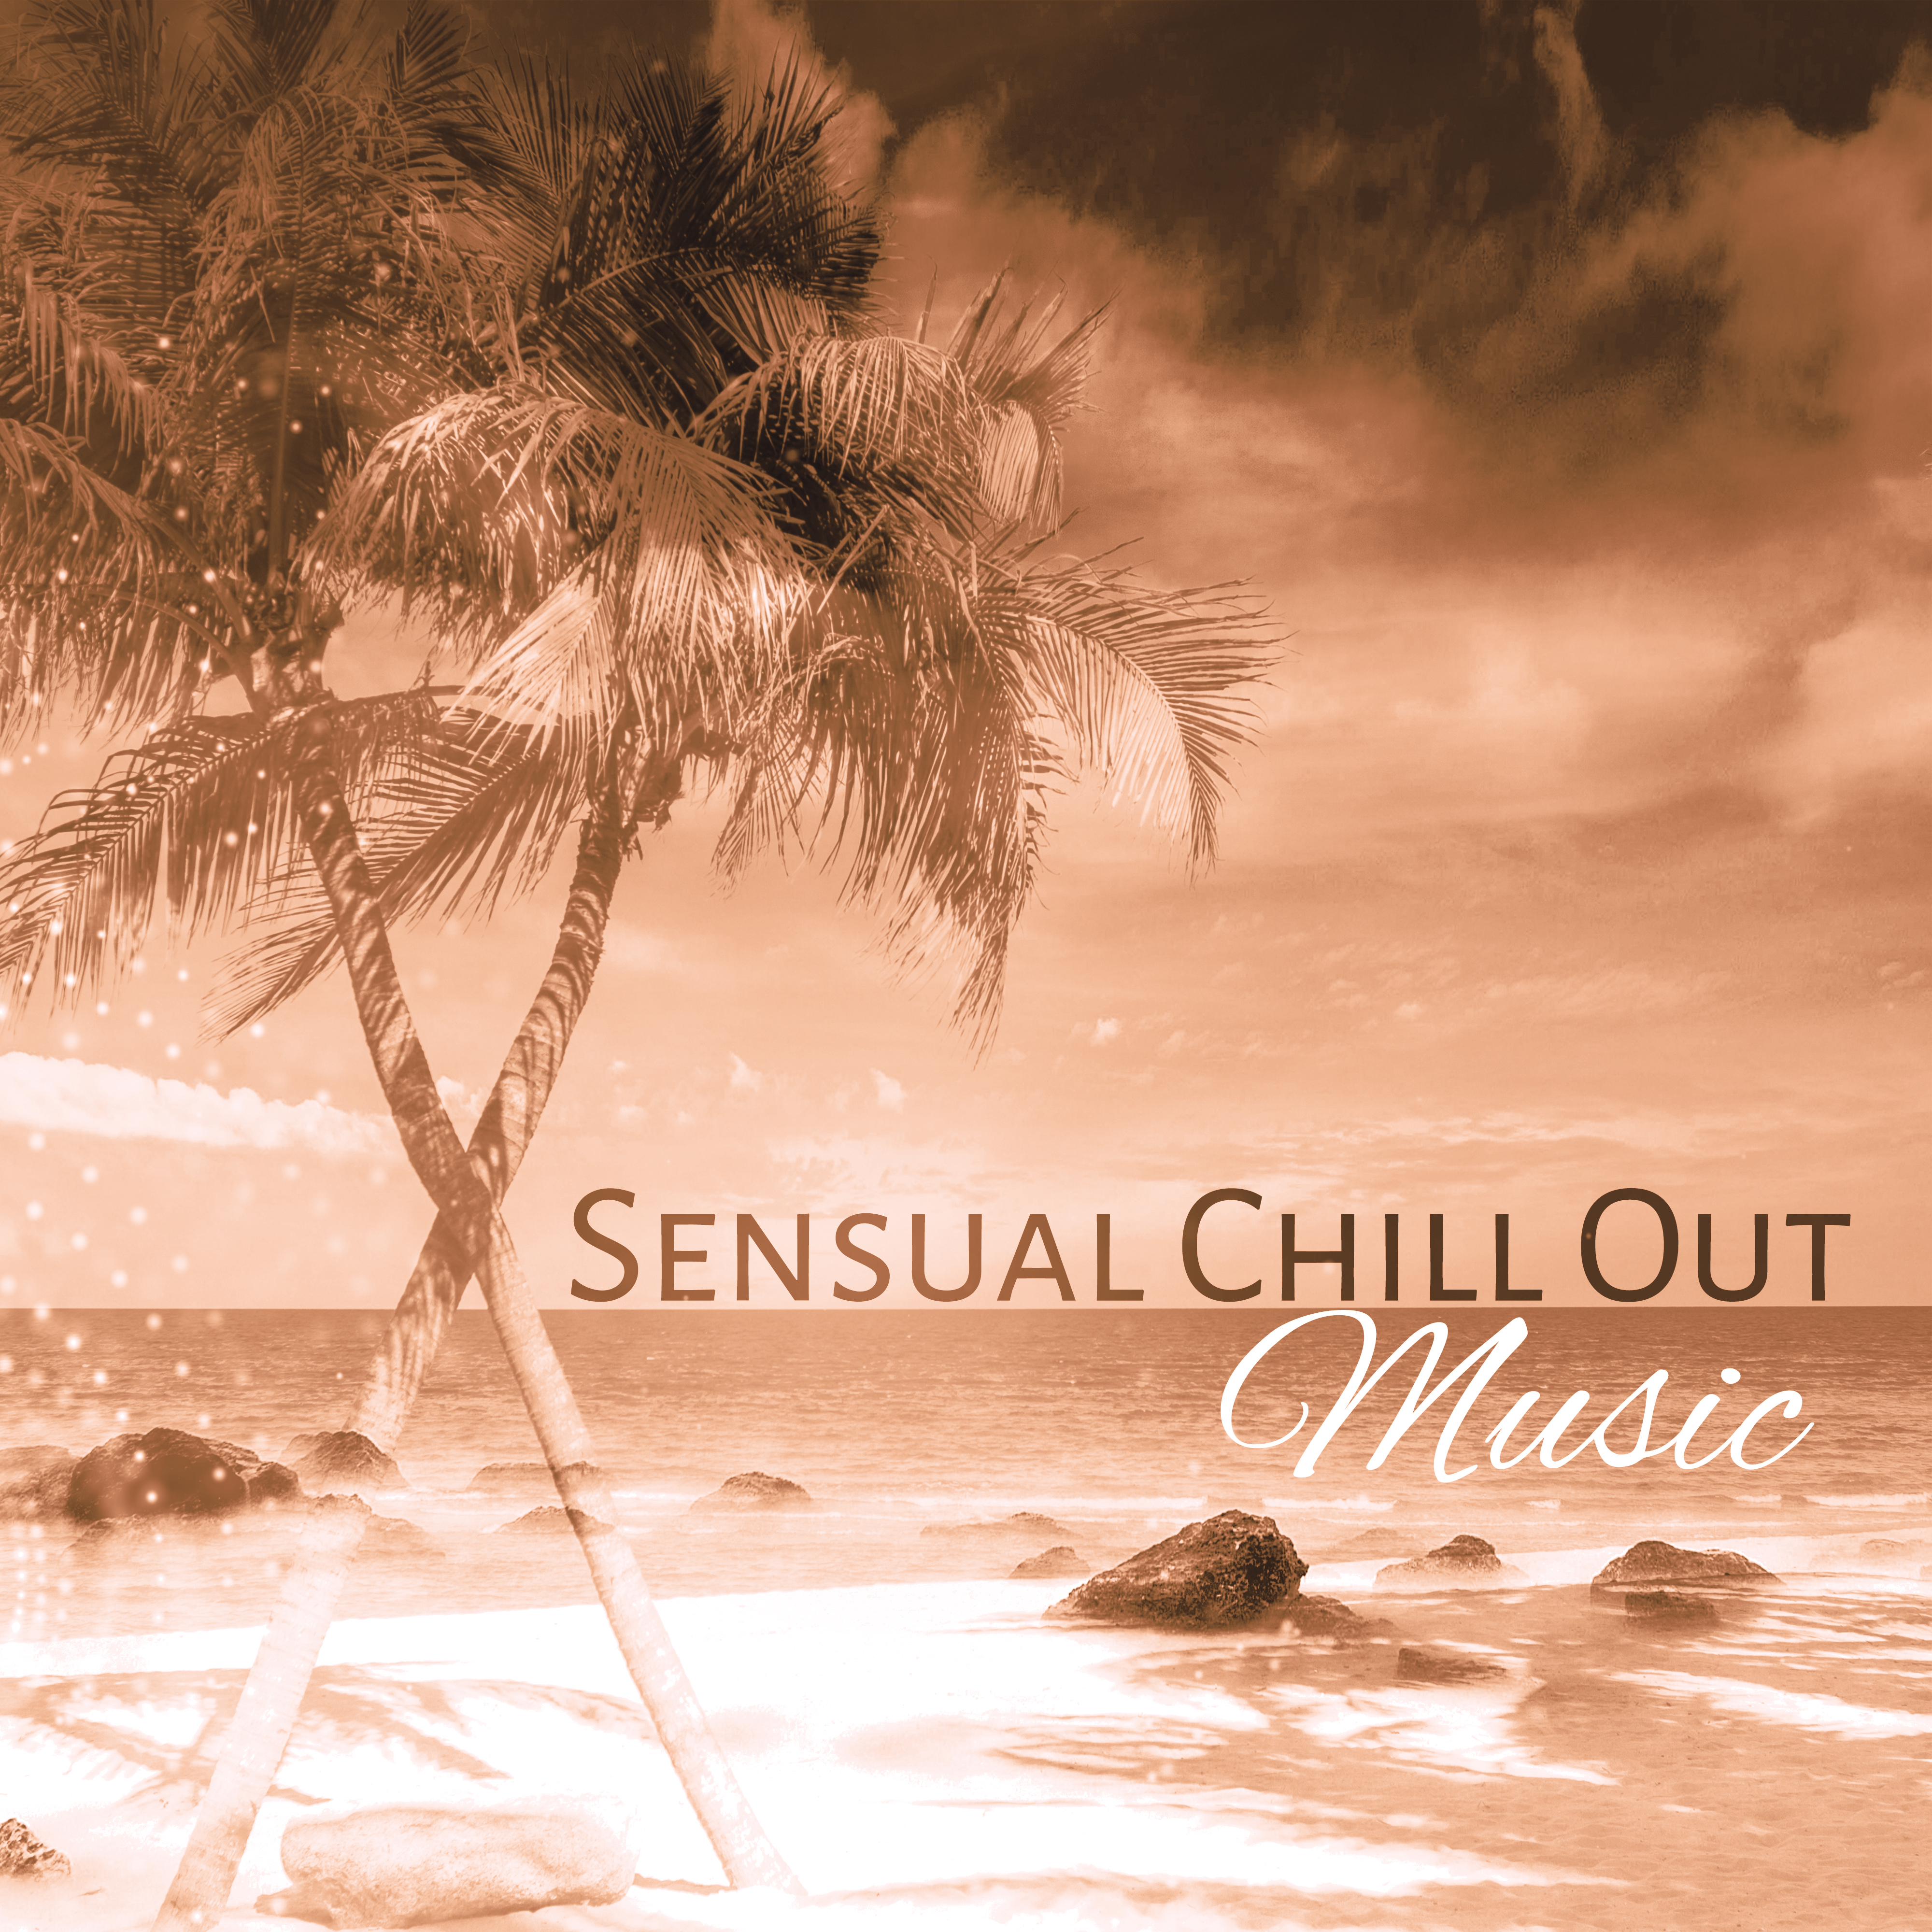 Sensual Chill Out Music  Erotic Vibes, Dance Party, Tropical Island, Summer Time